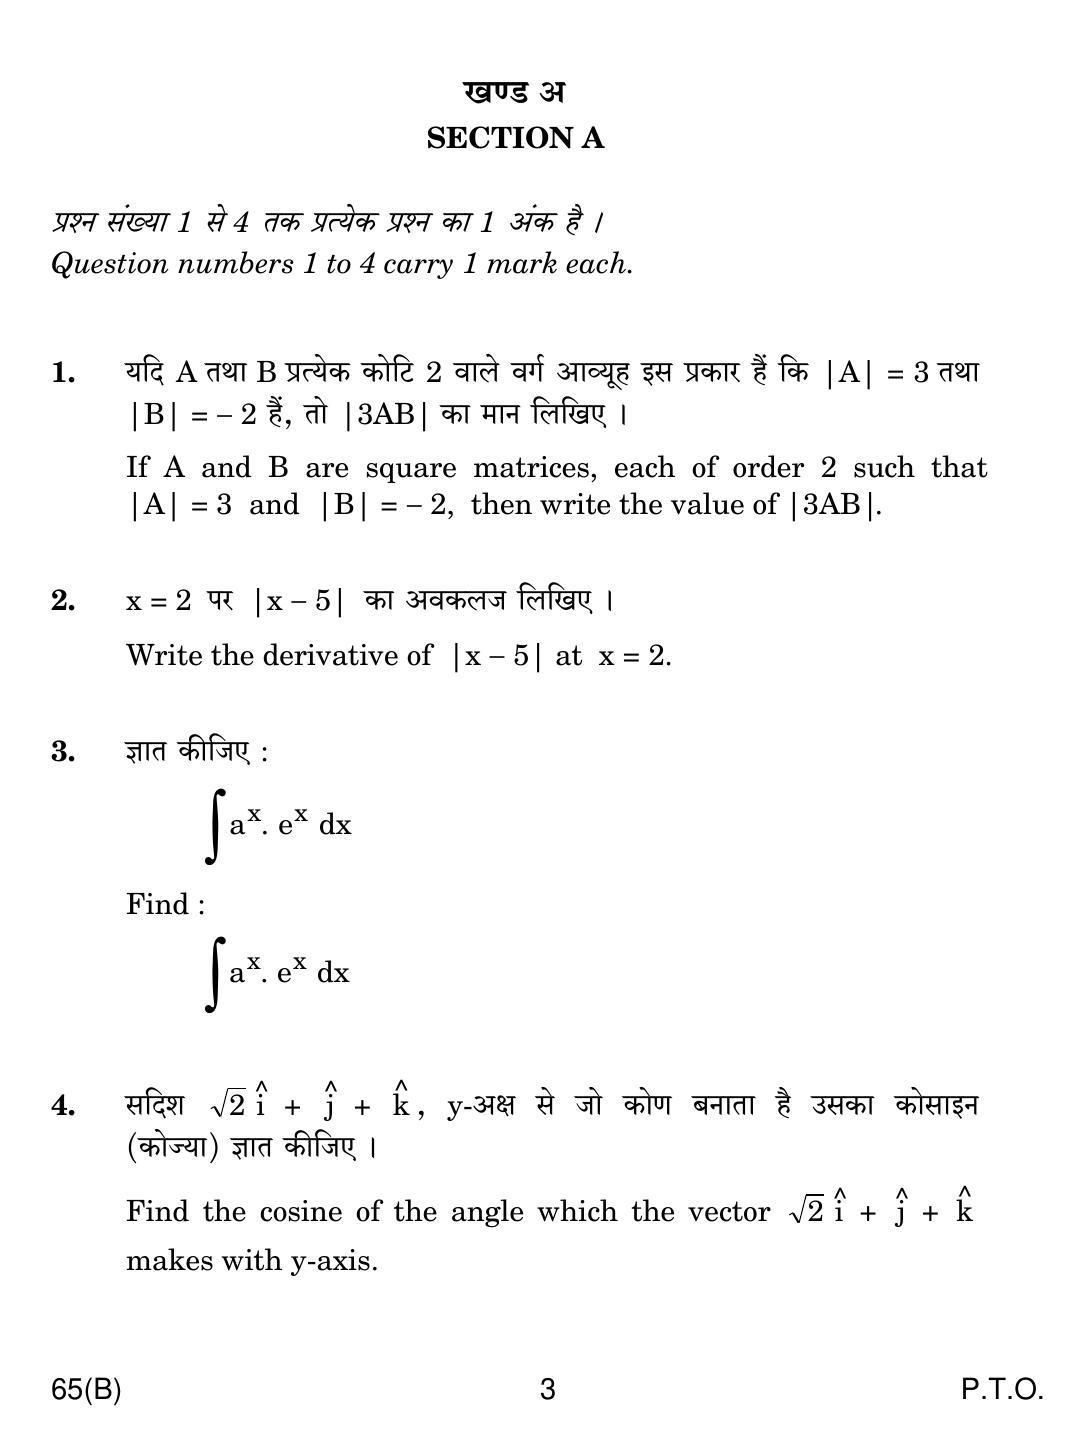 CBSE Class 12 65(B) MATHS FOR BLIND CANDIDATES 2018 Question Paper - Page 3